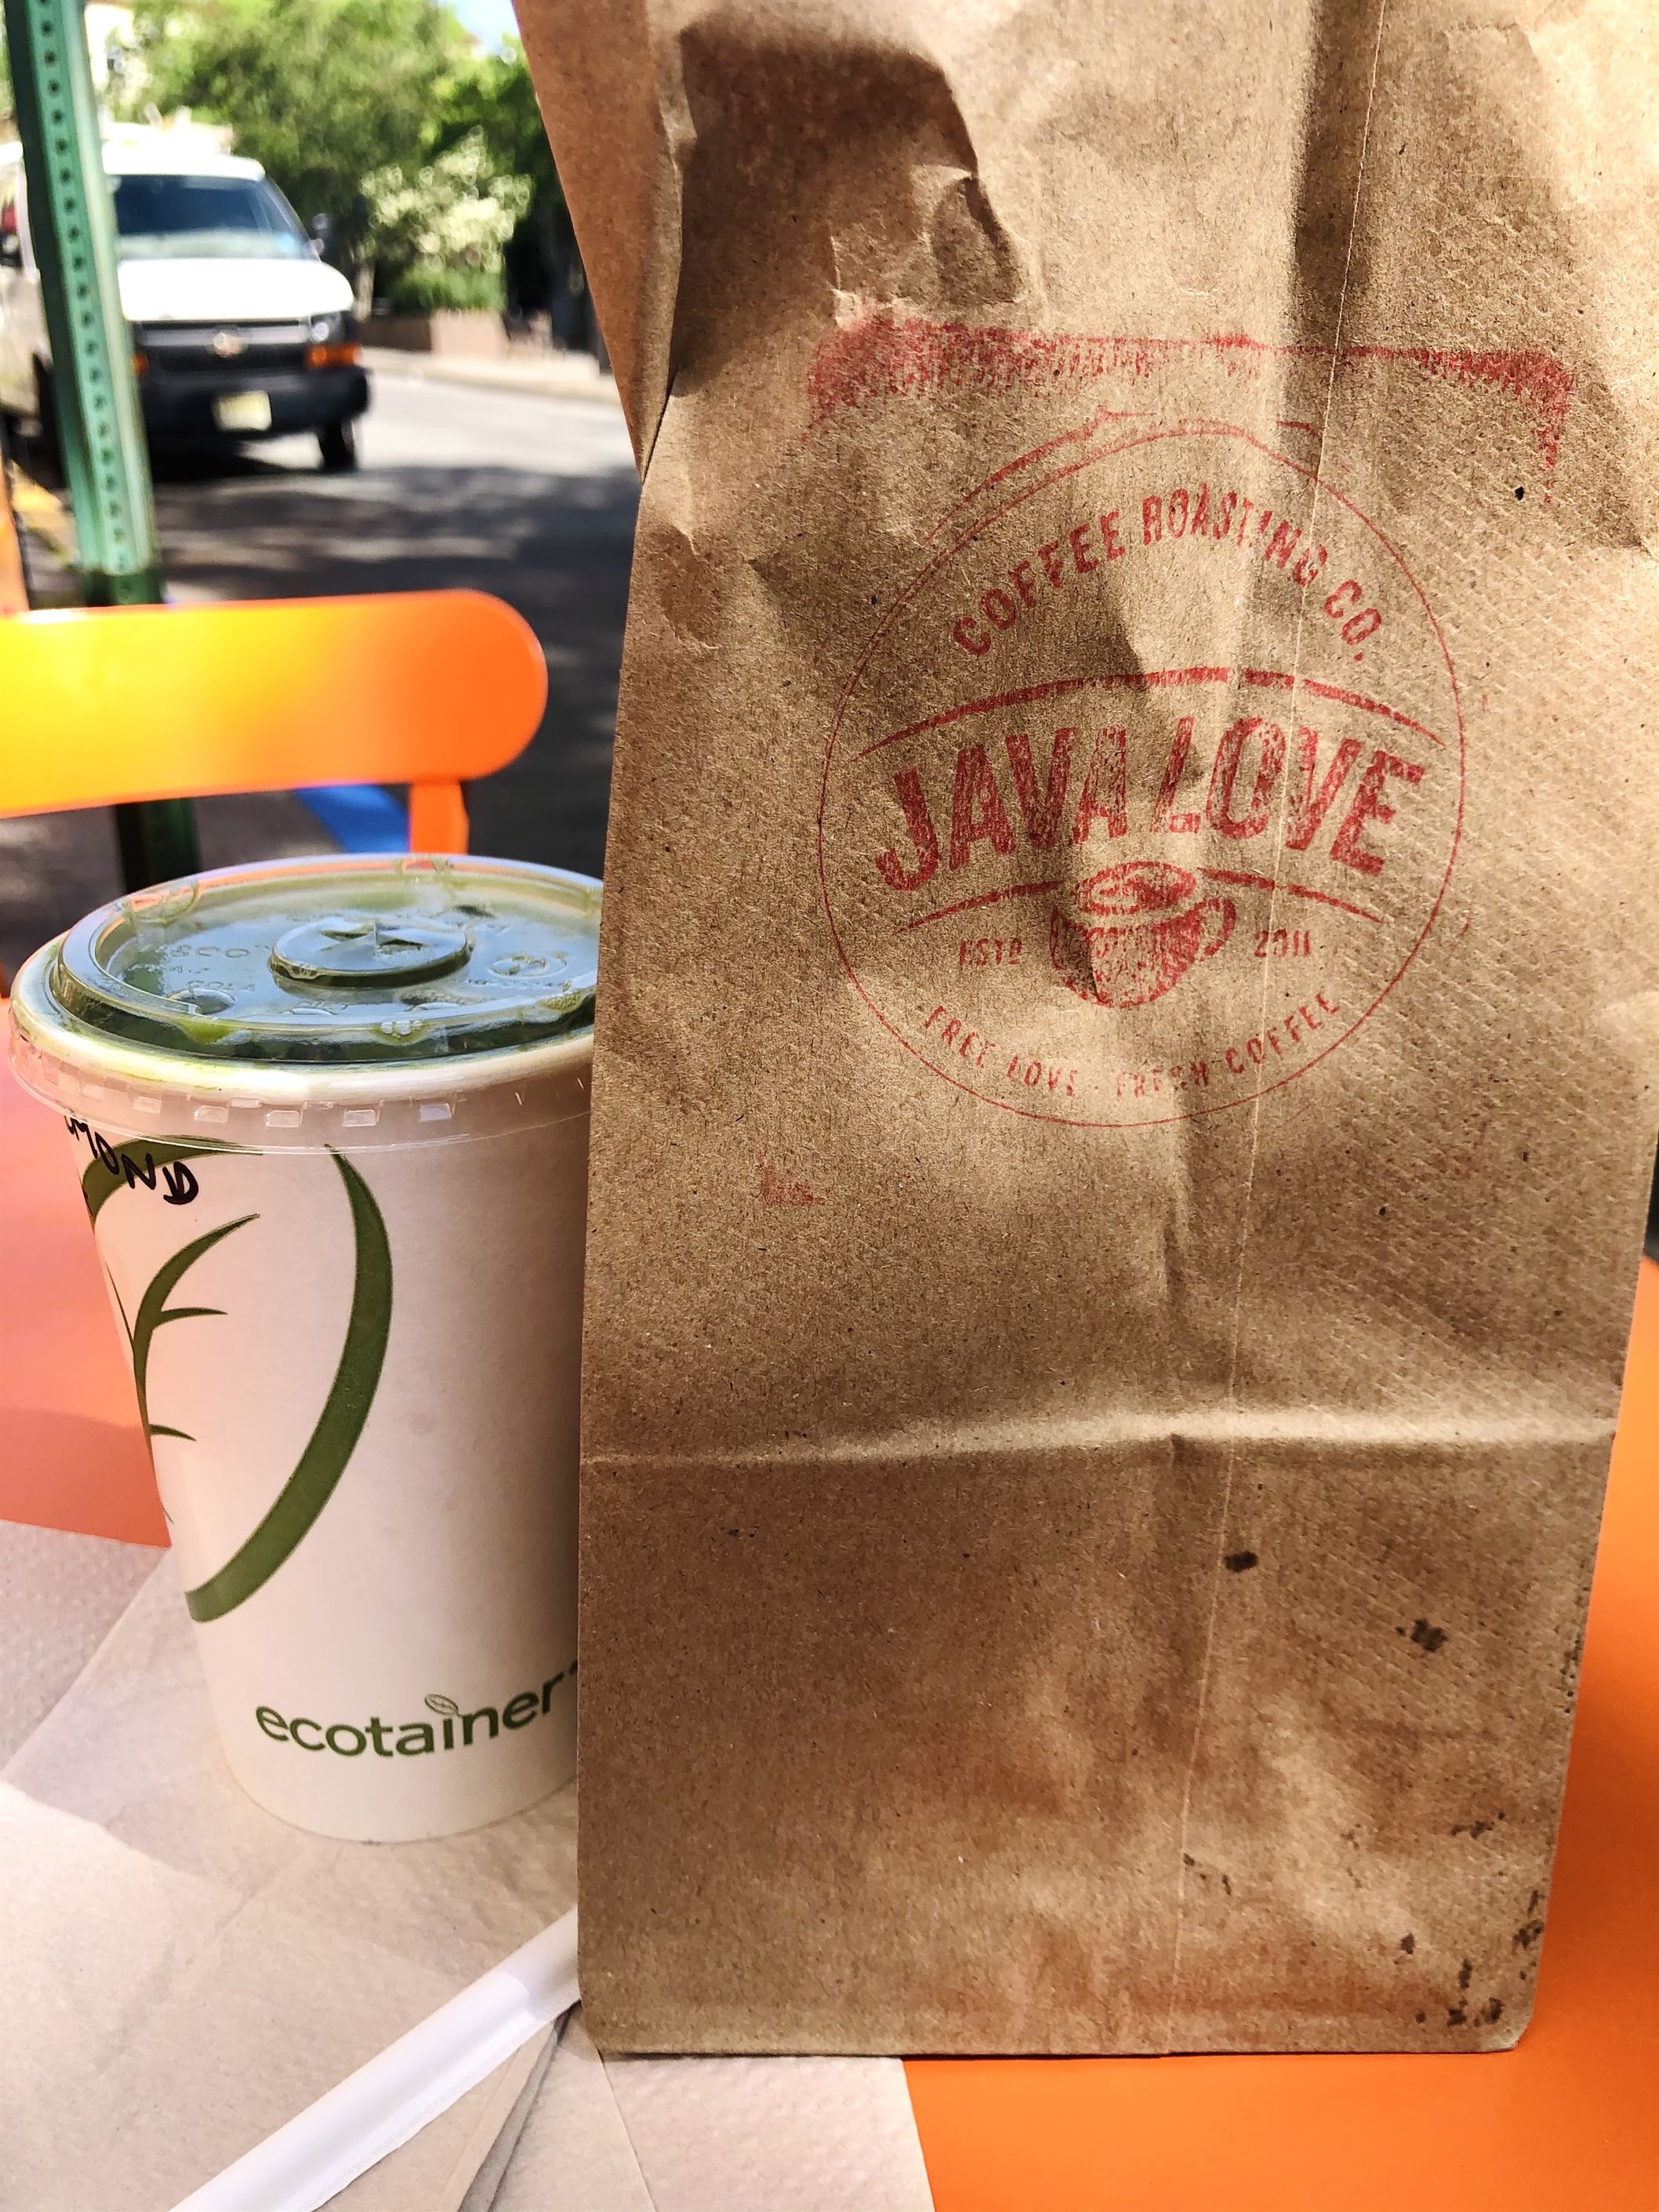 Java Love makes a delicious matcha latte and brownie. Photo courtesy of Alyssa Smolen